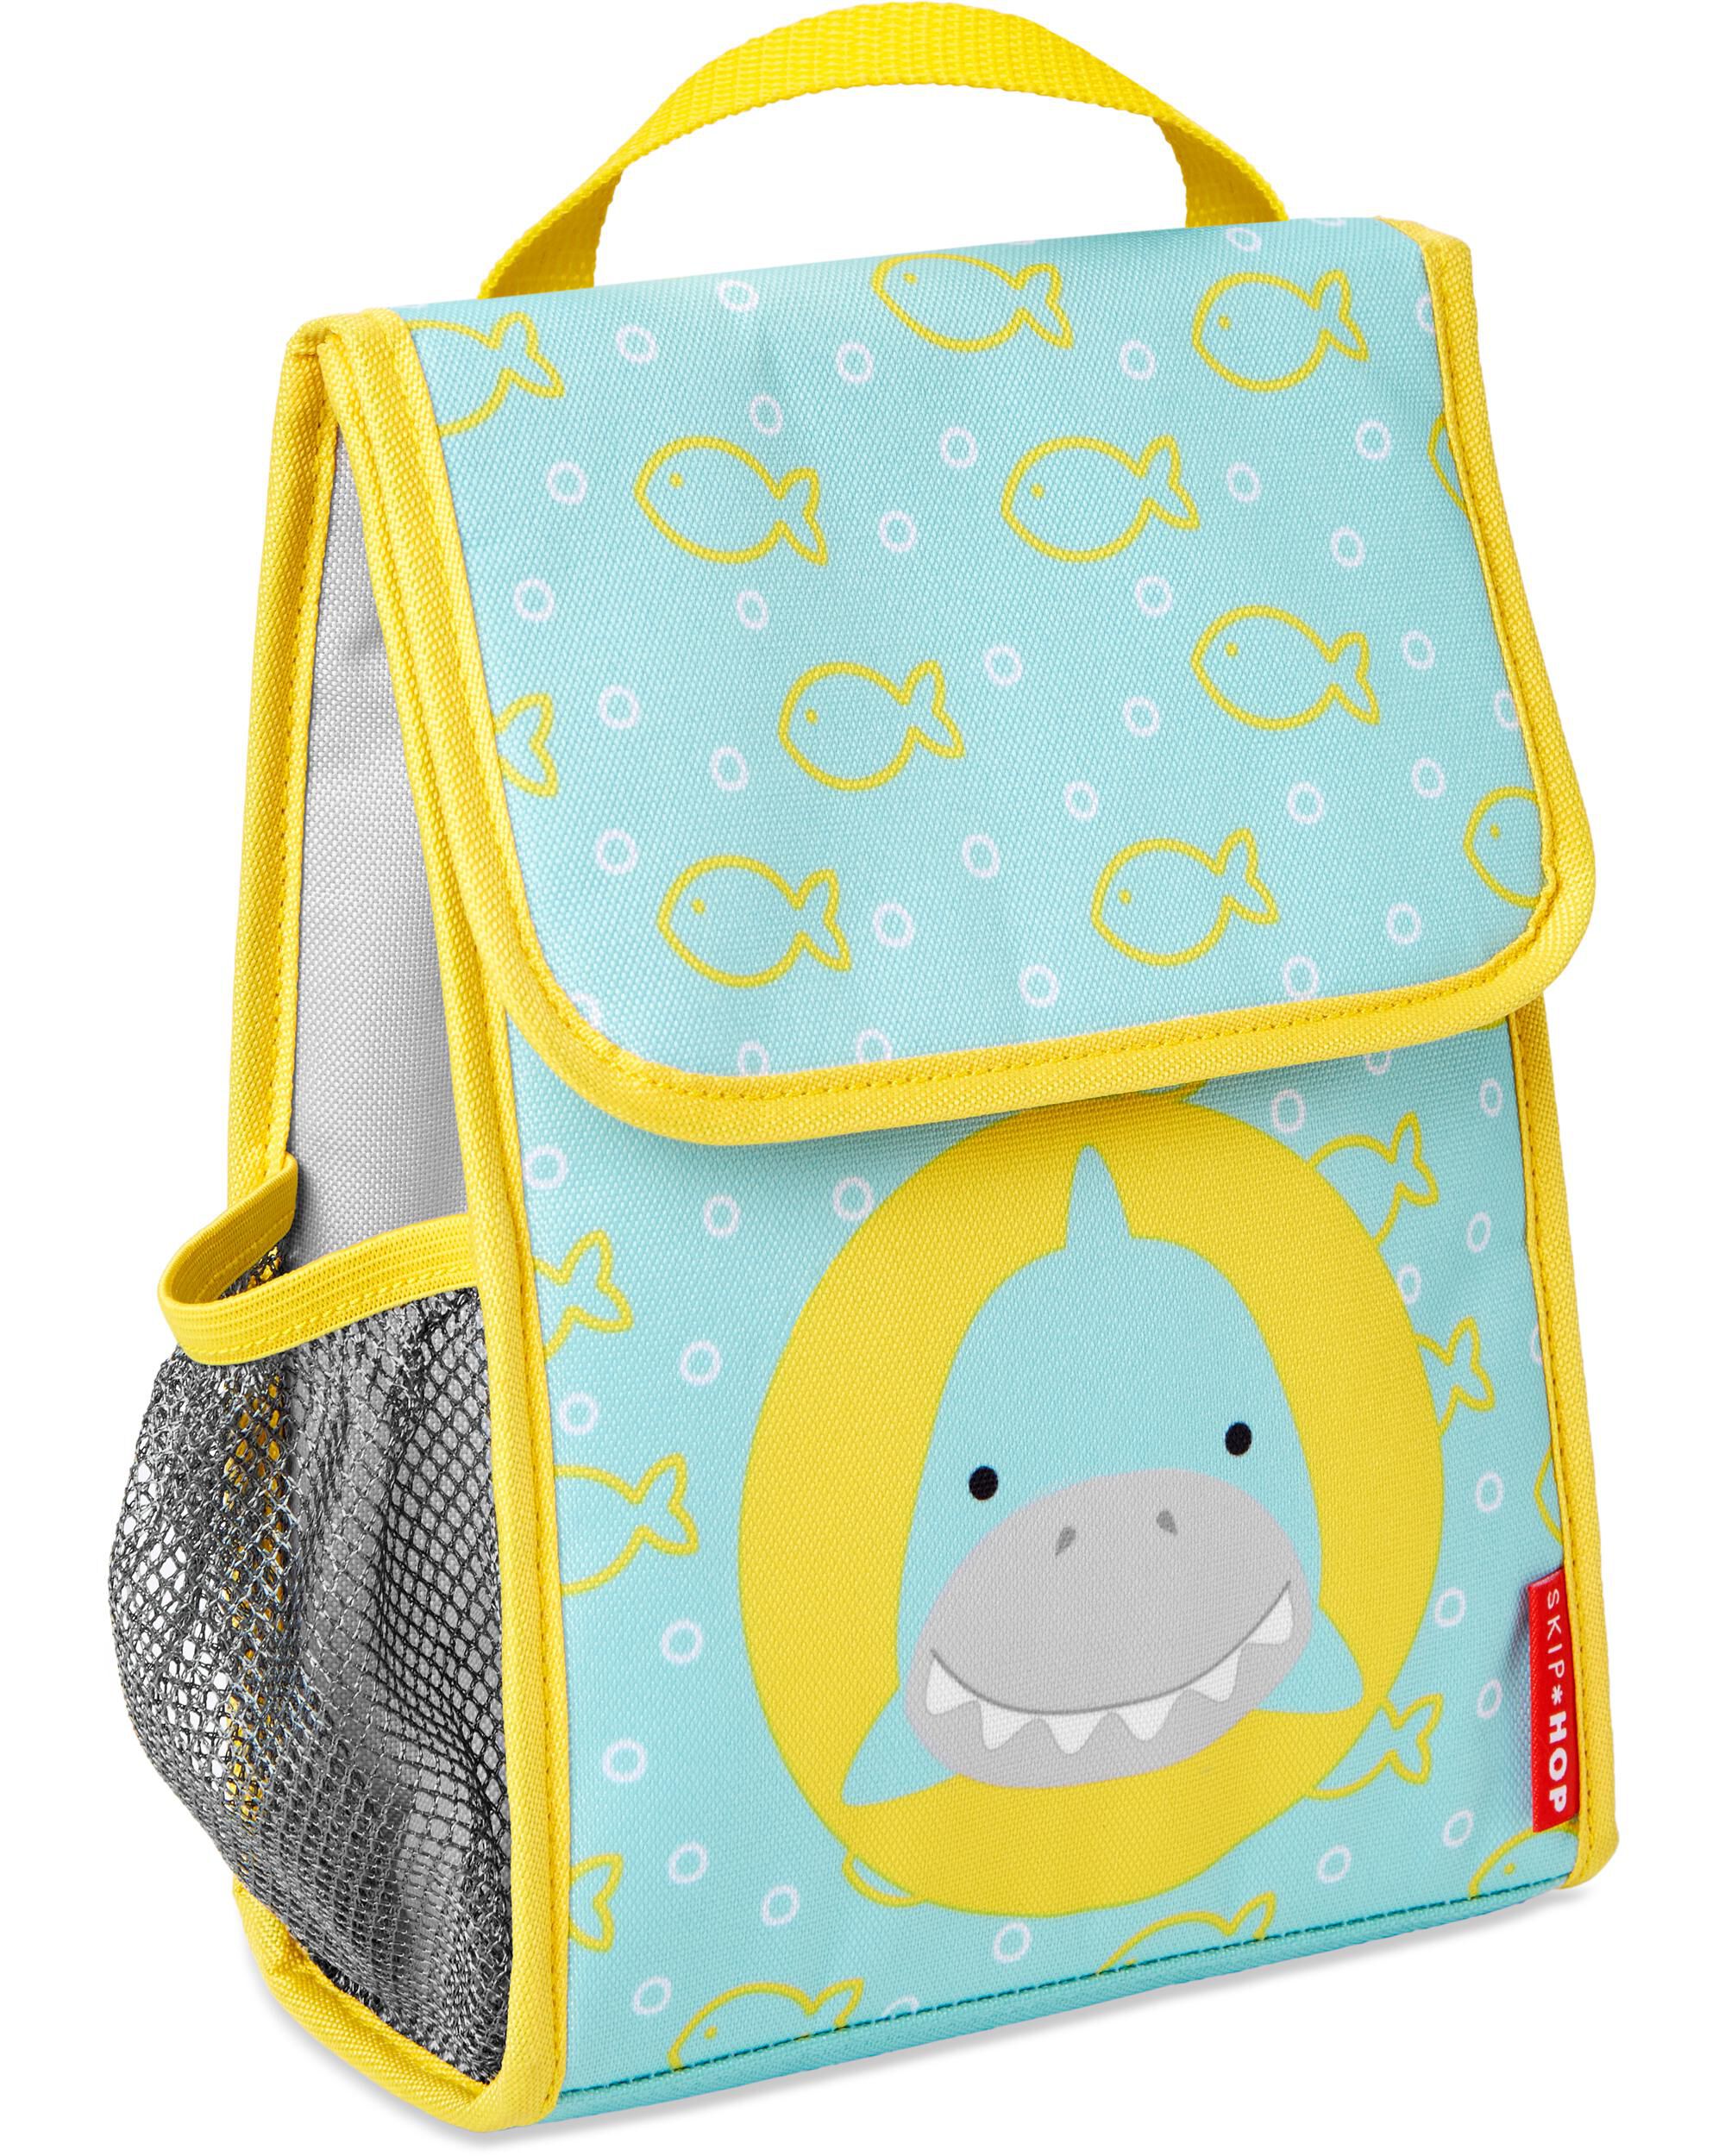  Paws and Claws Lunch Bag - Shark 119192-SHK